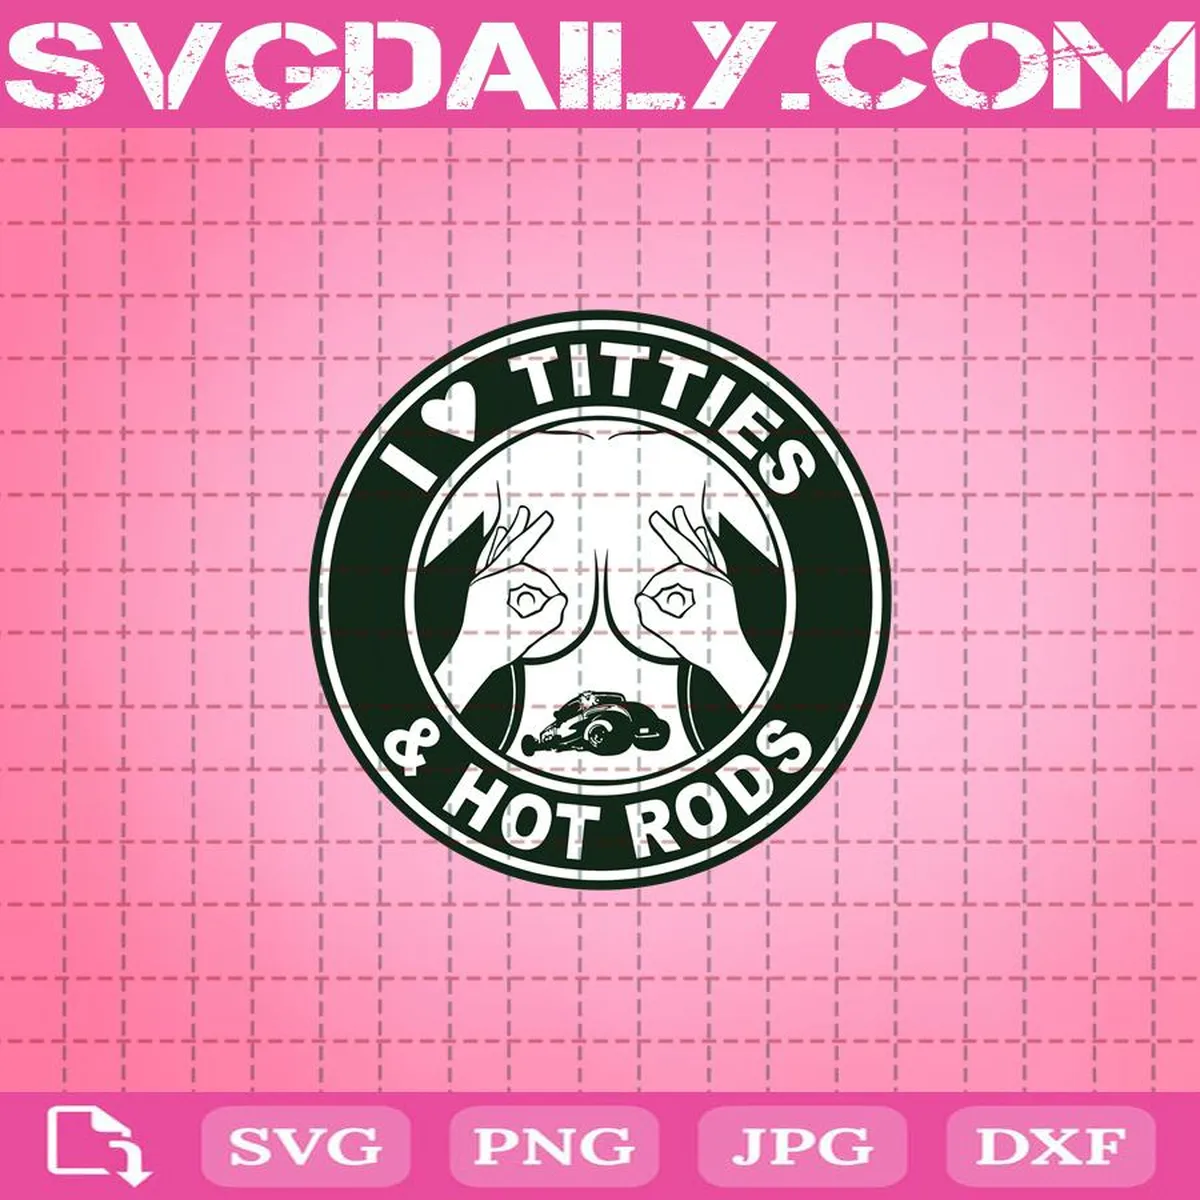 I Love Titties And Hot Rods Svg, I Love Titties Svg, Titties And Hot Rods Svg, Titties Svg, Hot Rods Svg, Love Titties Svg